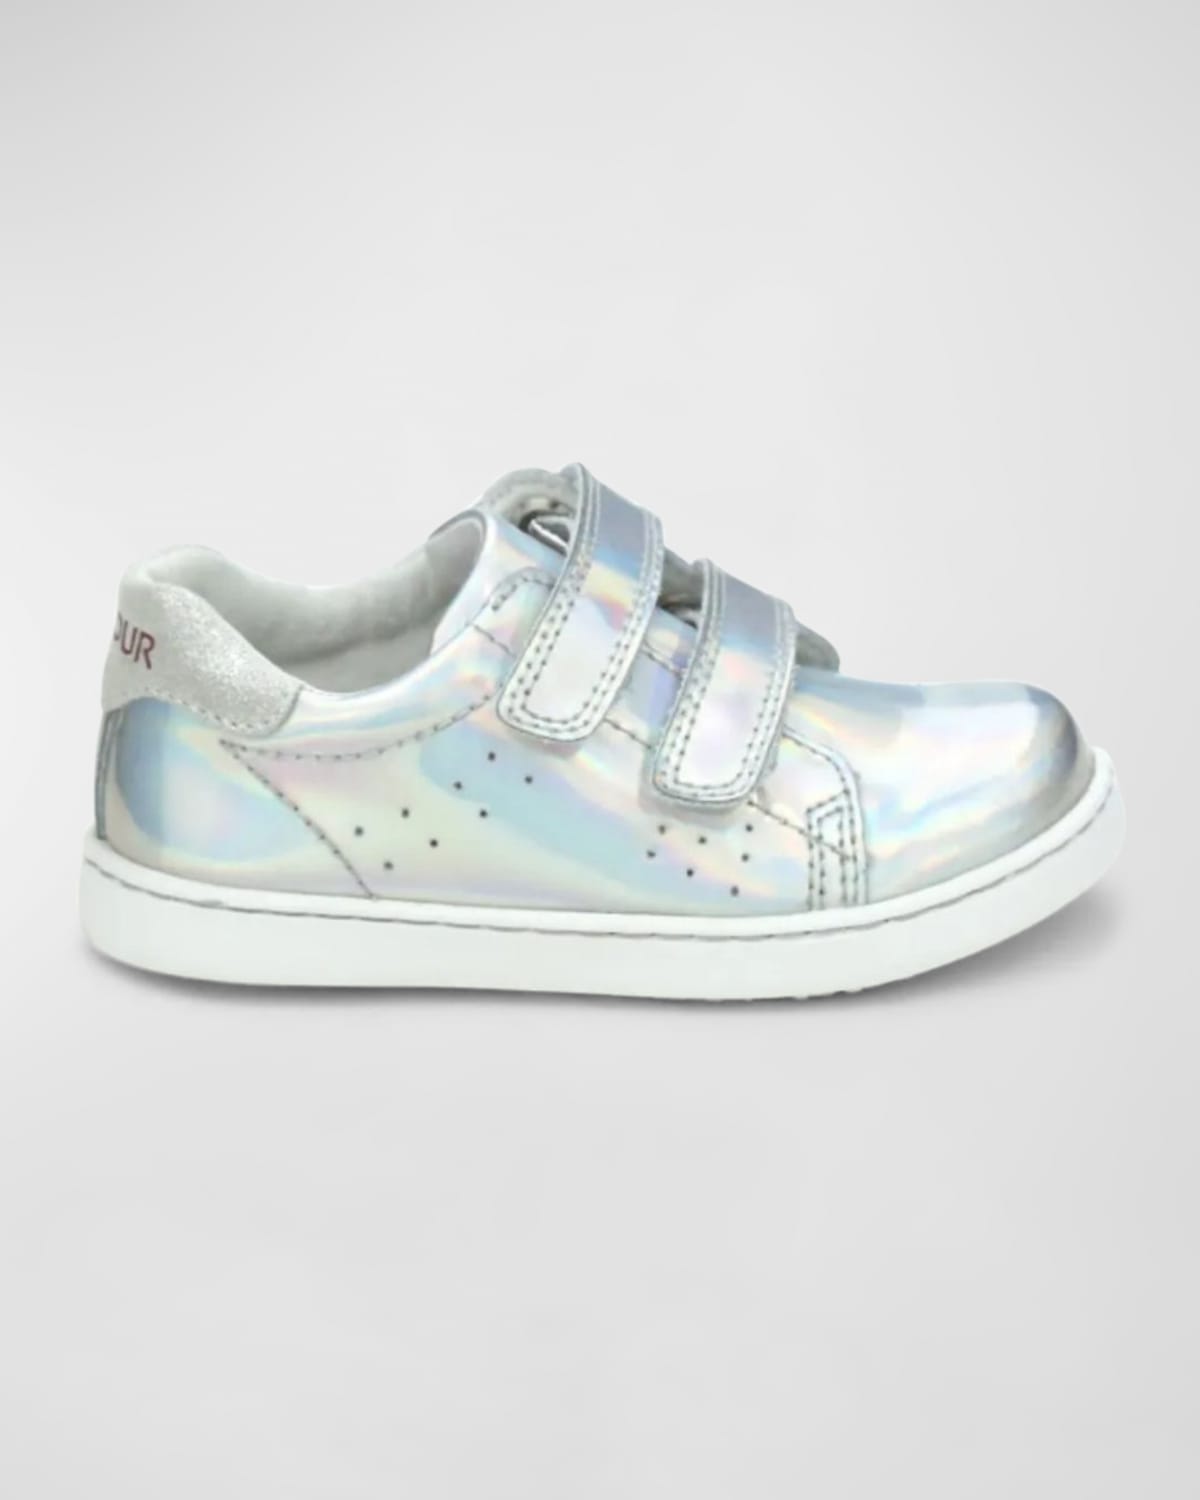 L'amour Shoes Girl's Kenzie Leather Trainers, Baby/toddlers/kids In Holo